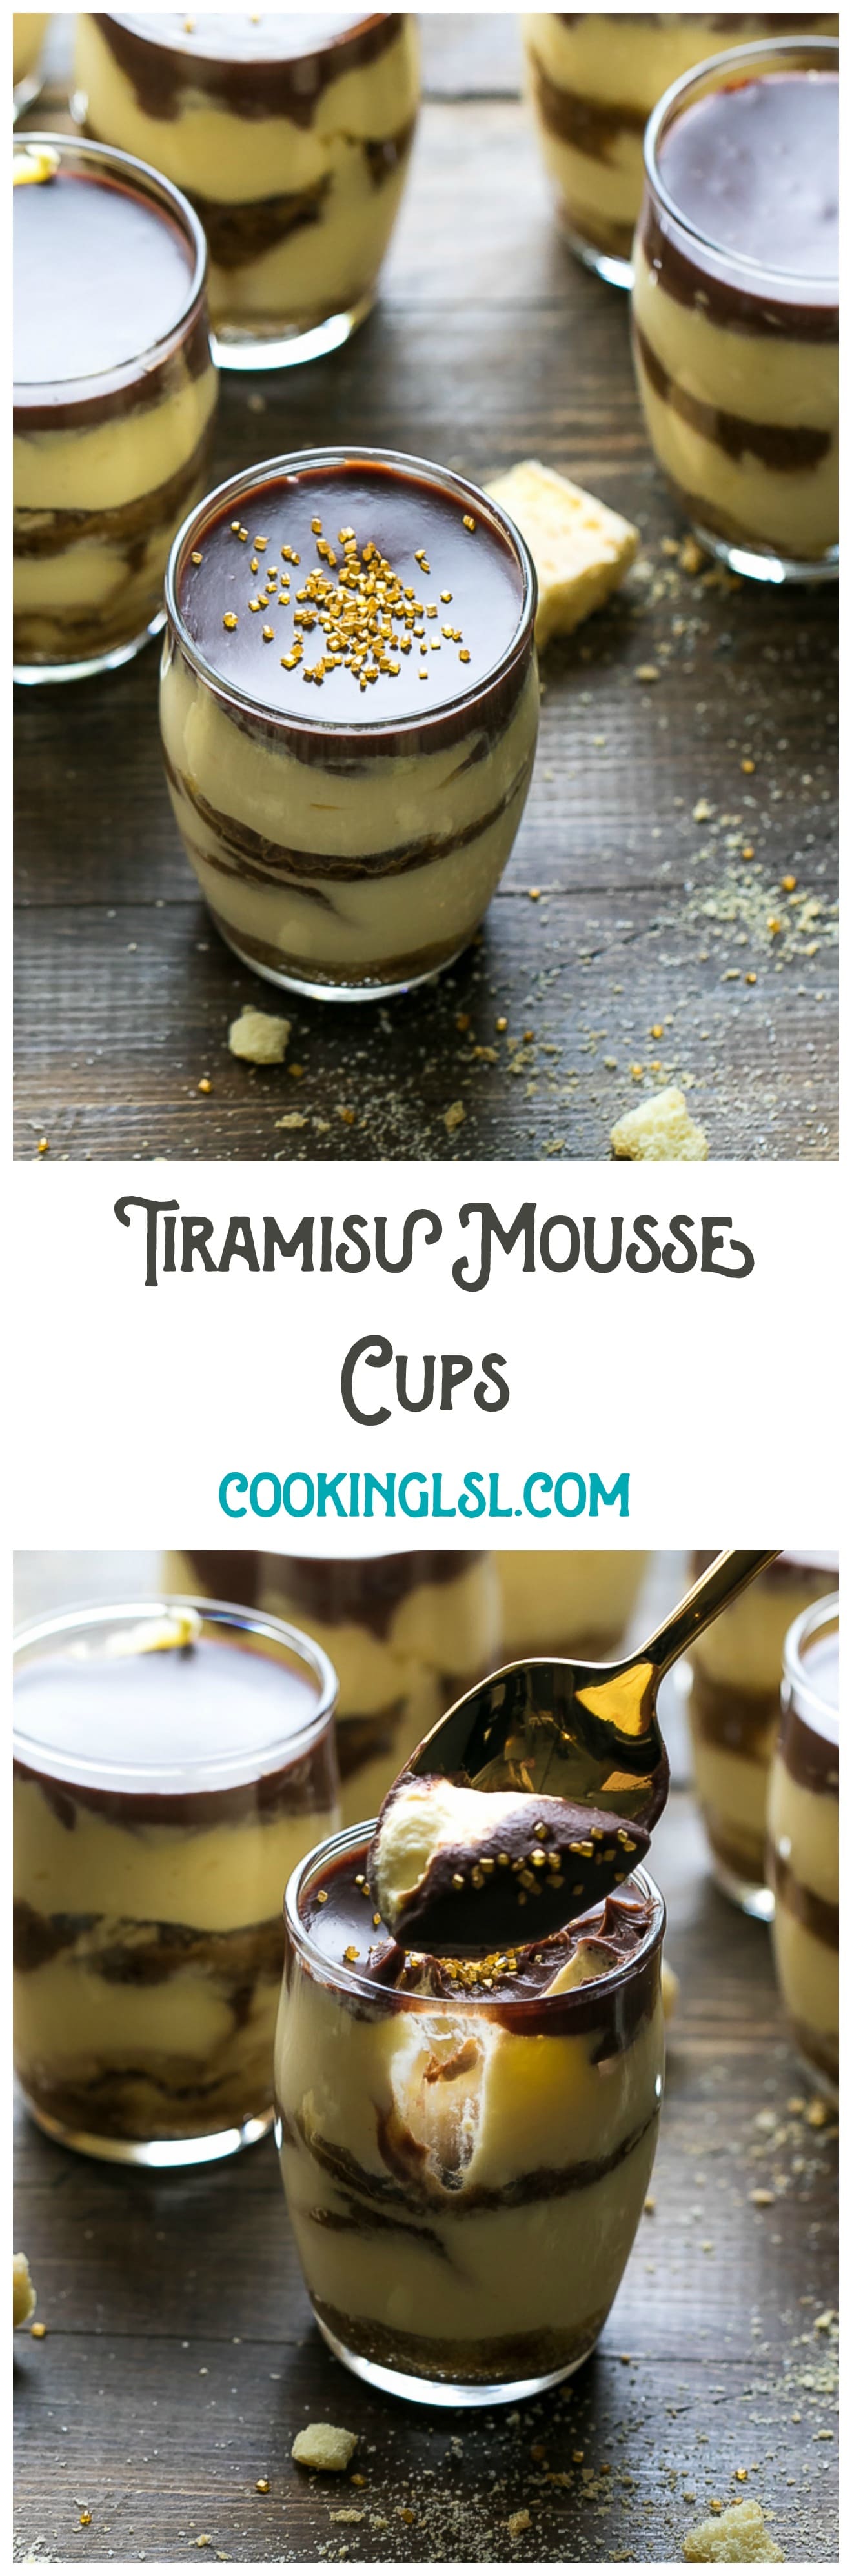 Easy Tiramisu Mousse Cups. Dessert in a cup, with chocolate ganache. Contains raw eggs.